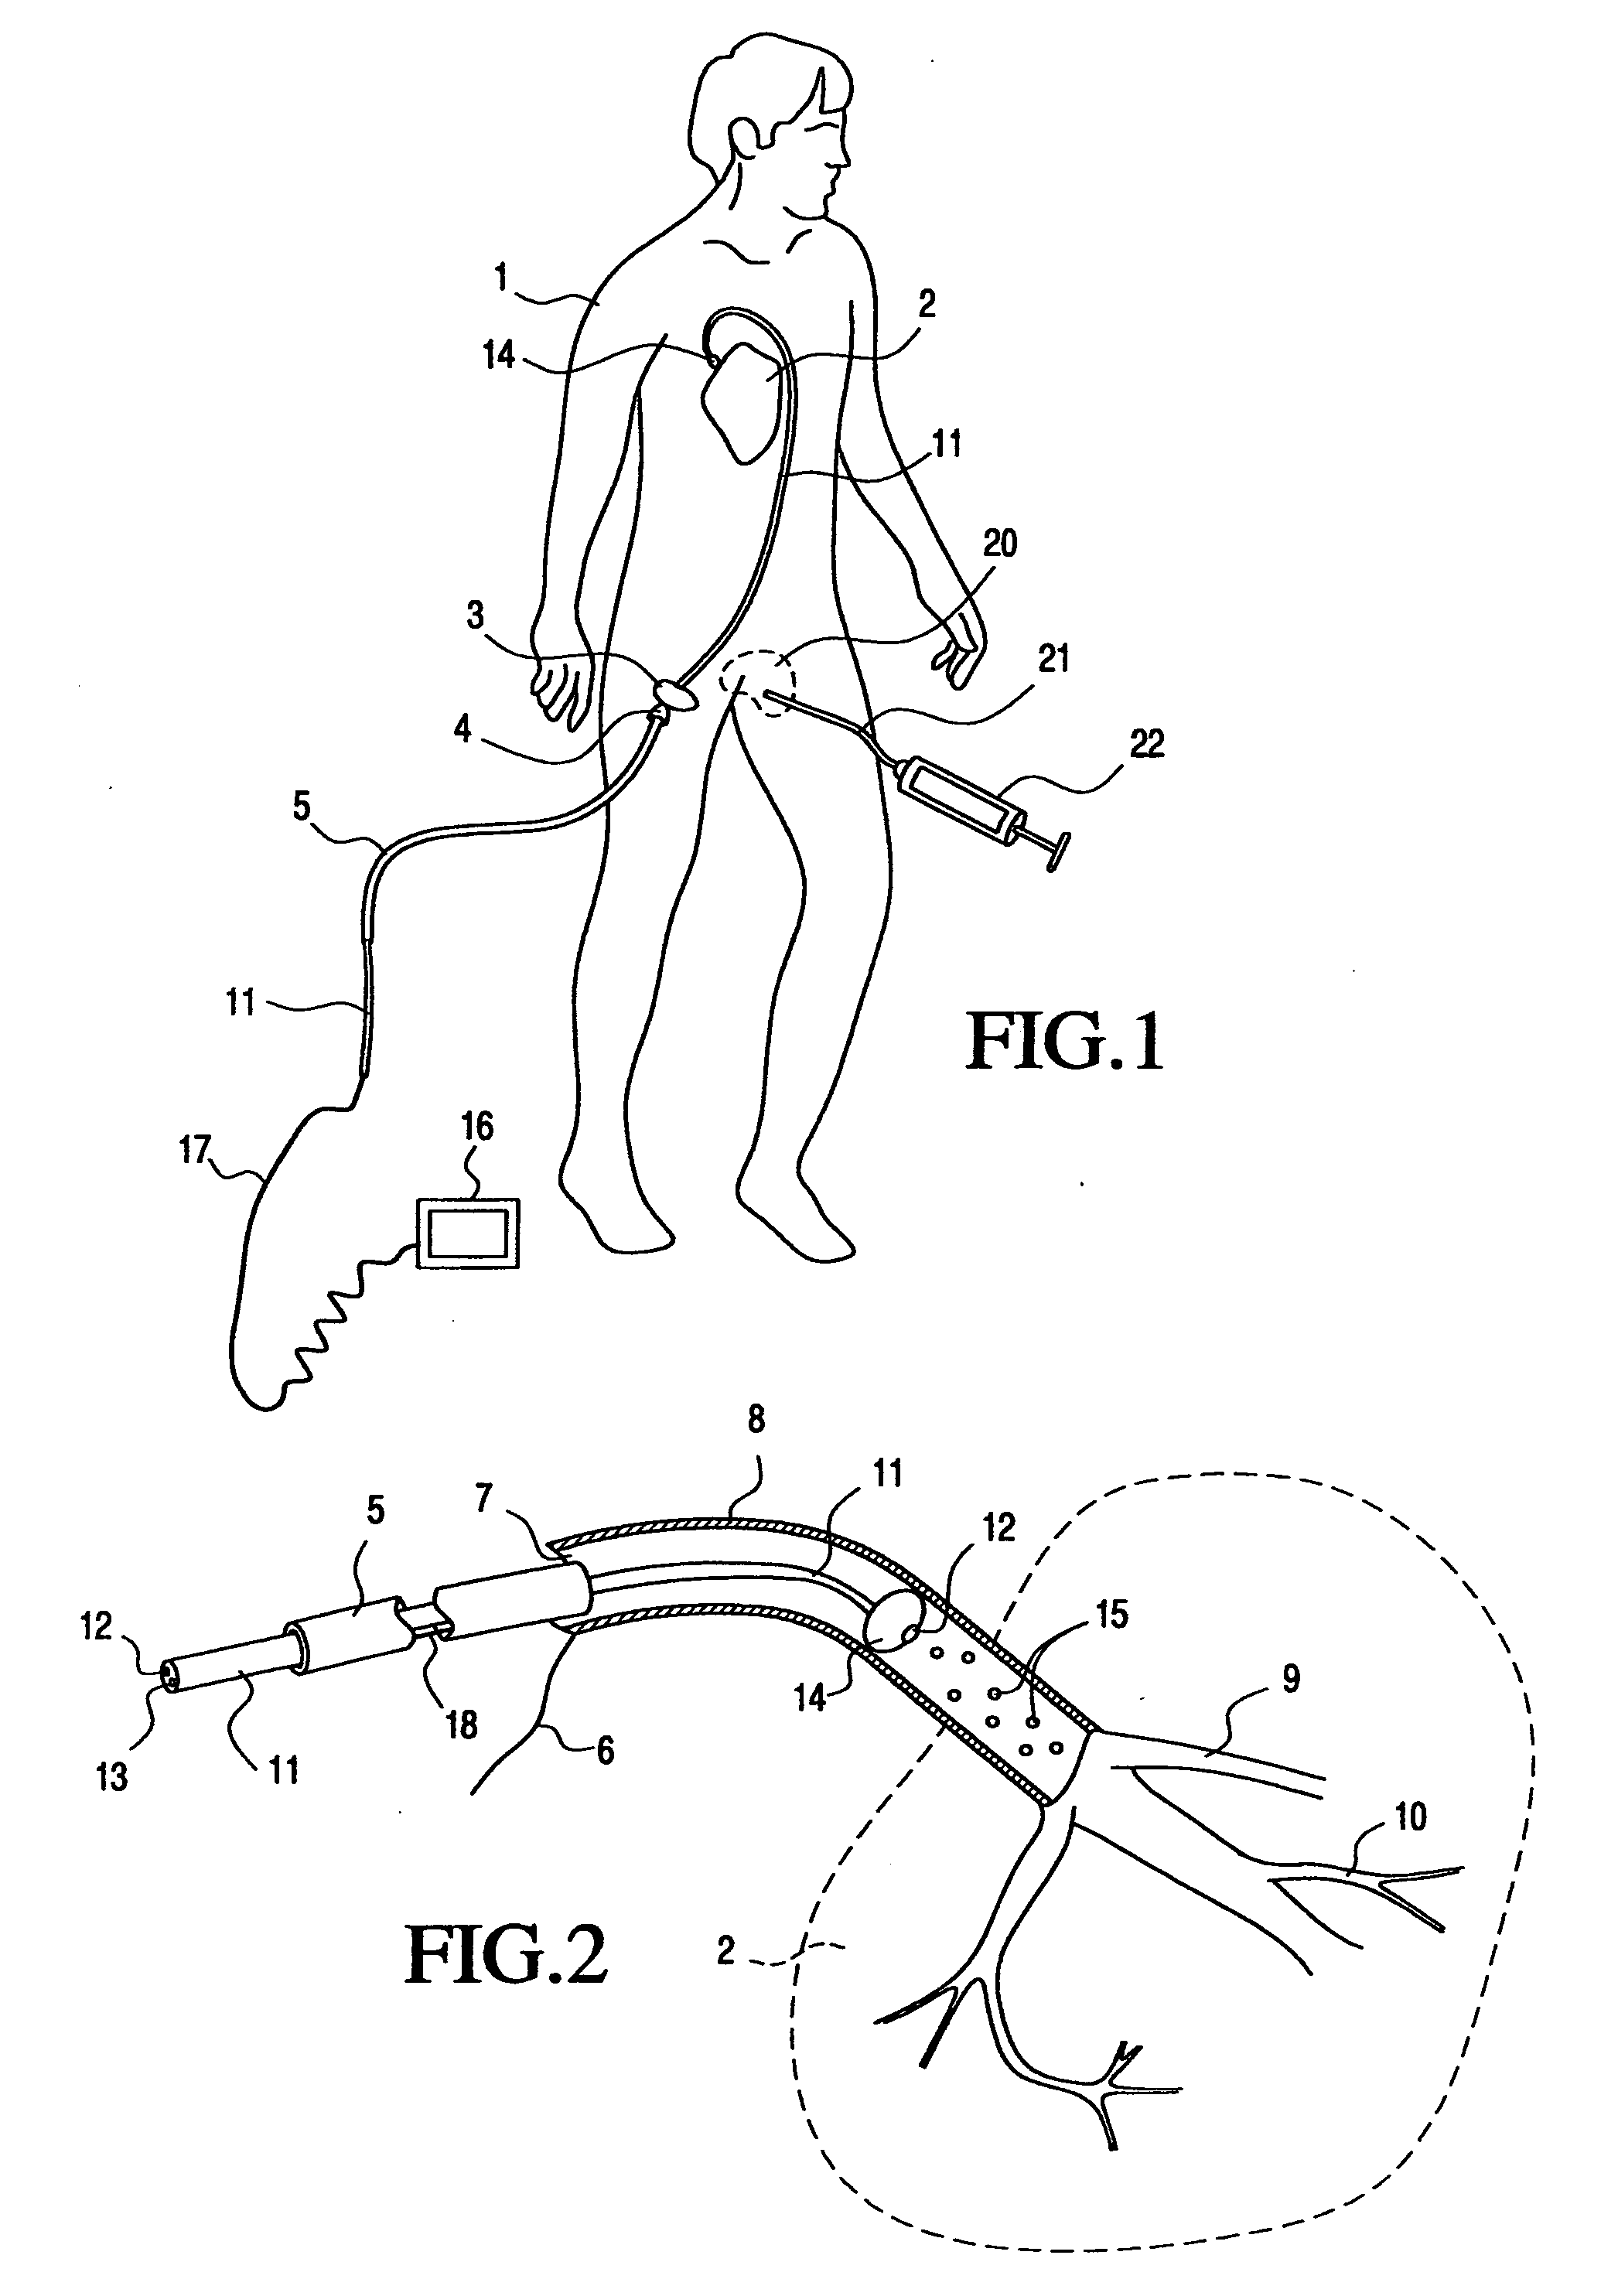 Method and instrumentation for control of stem cell injection into the body